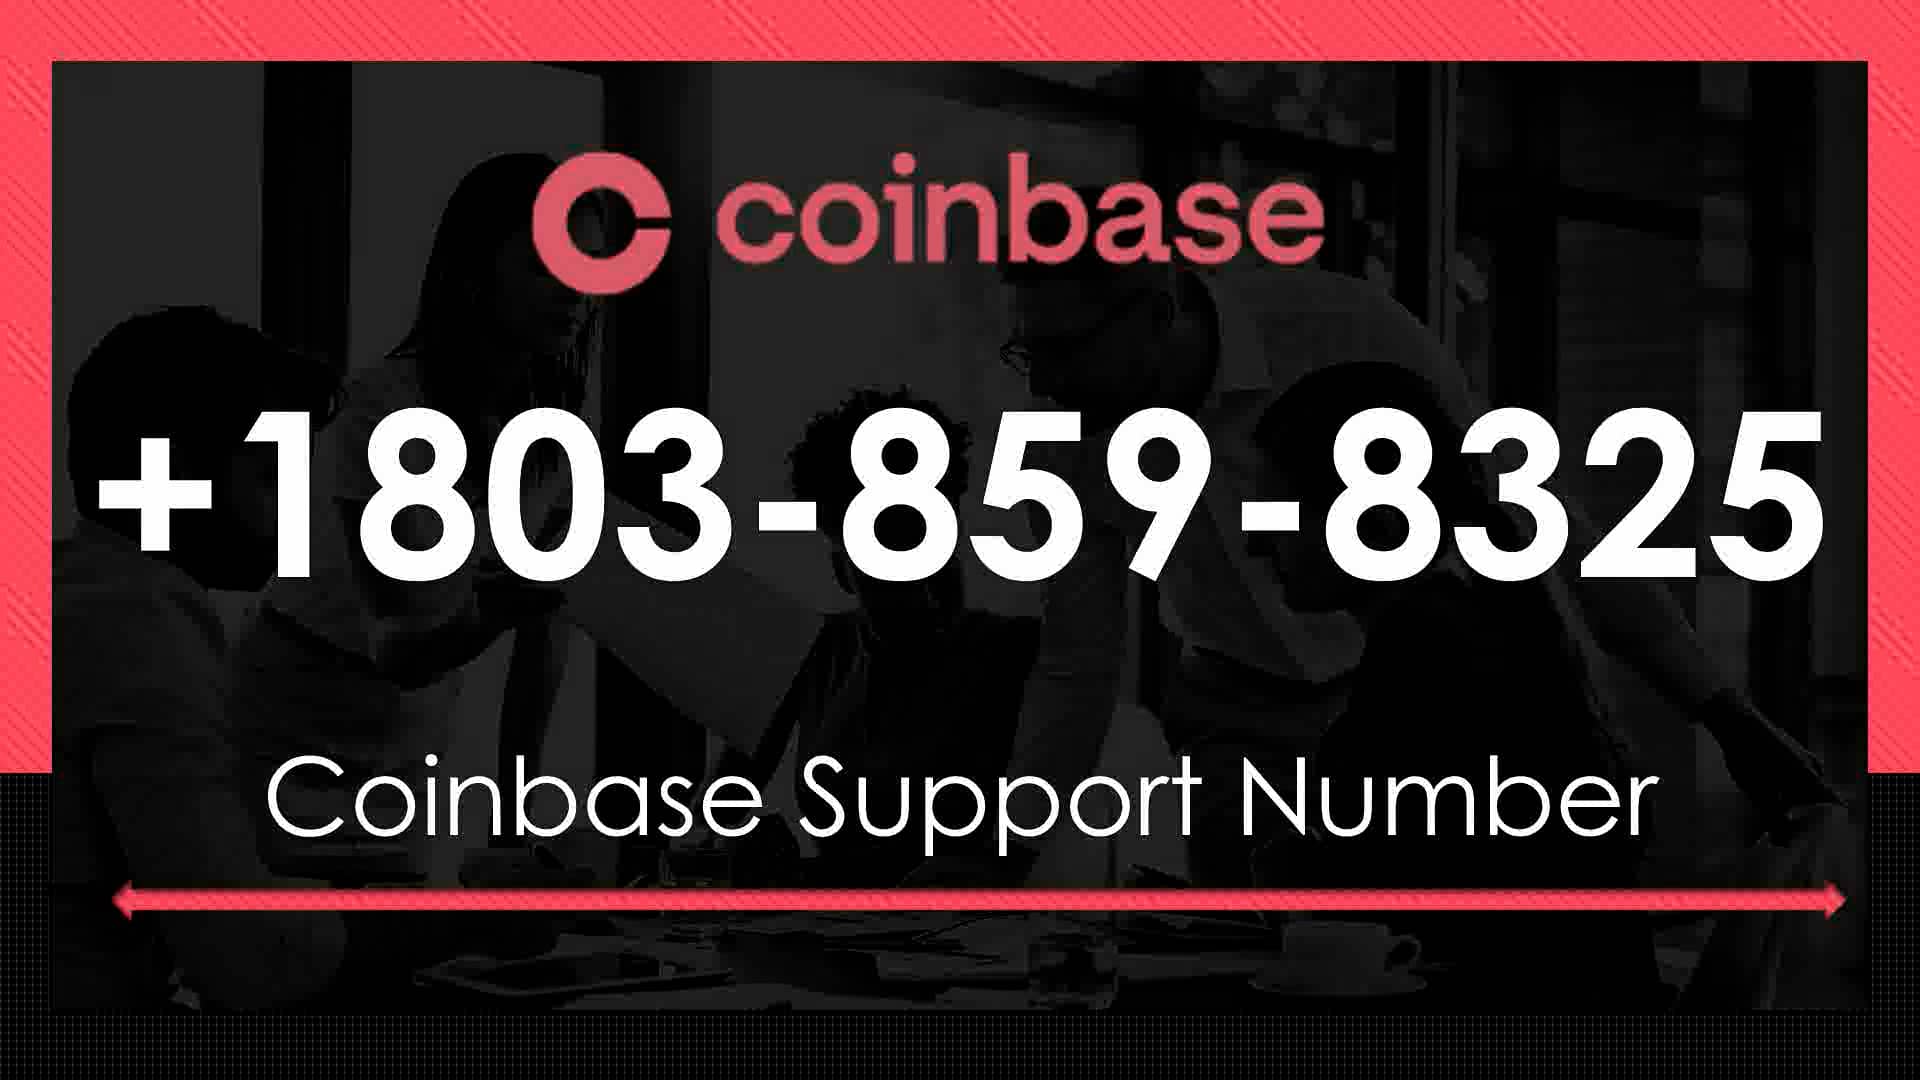 Coinbase Supp0rt Number +1+803+859+8325+ D21$ (79) on Vimeo